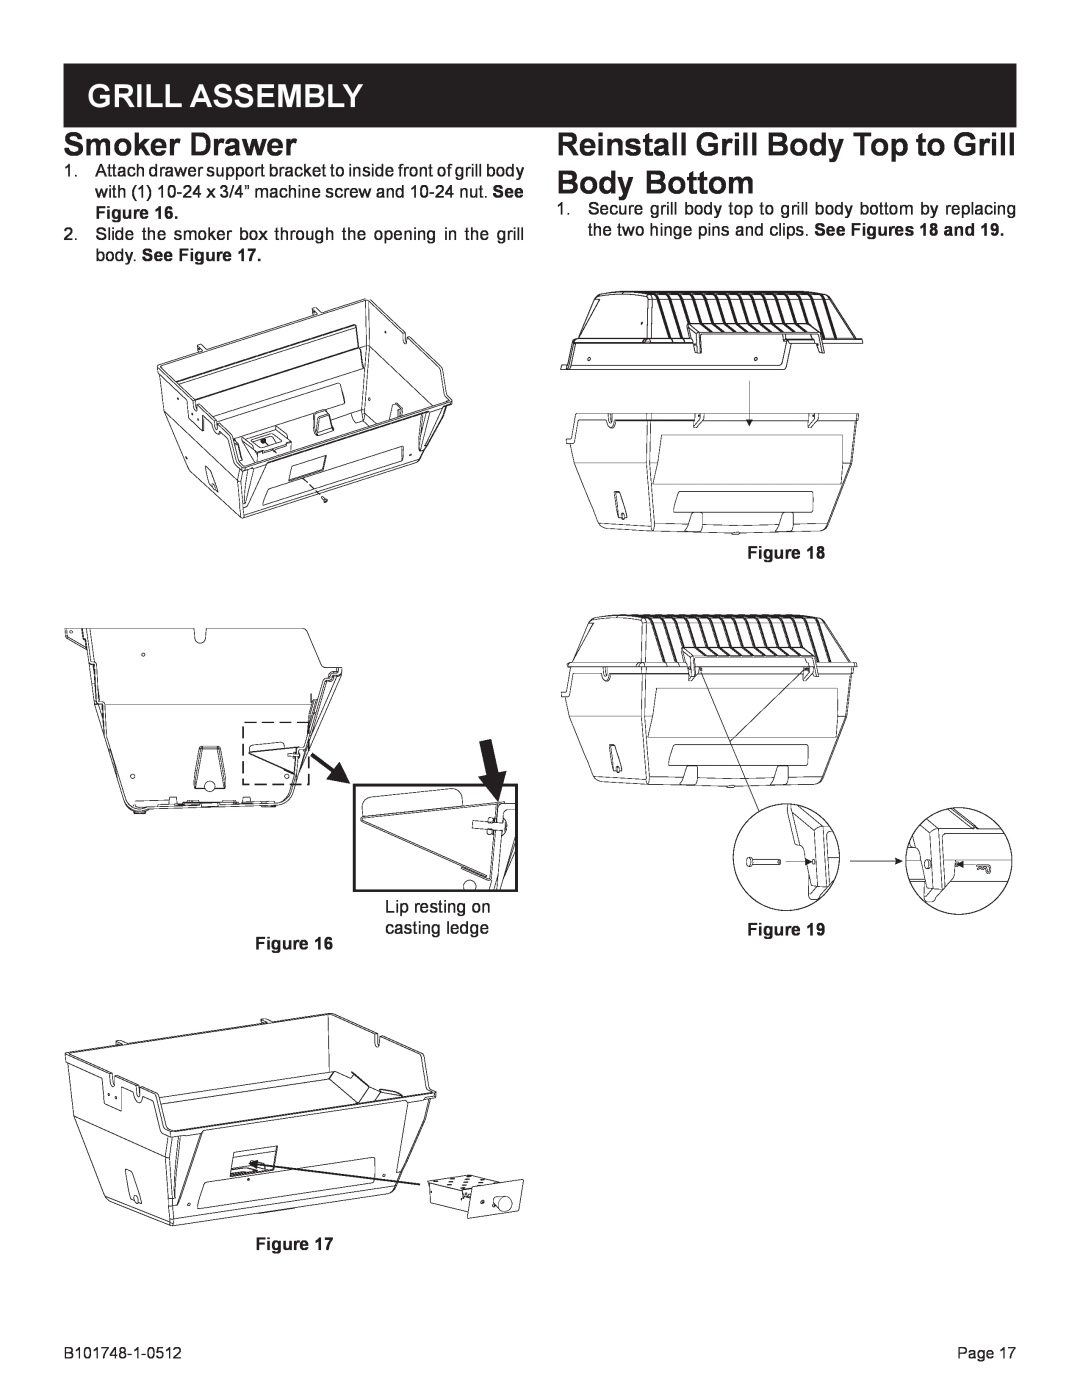 Broilmaster Q3XN-1 owner manual Smoker Drawer, Reinstall Grill Body Top to Grill Body Bottom, Grill Assembly 